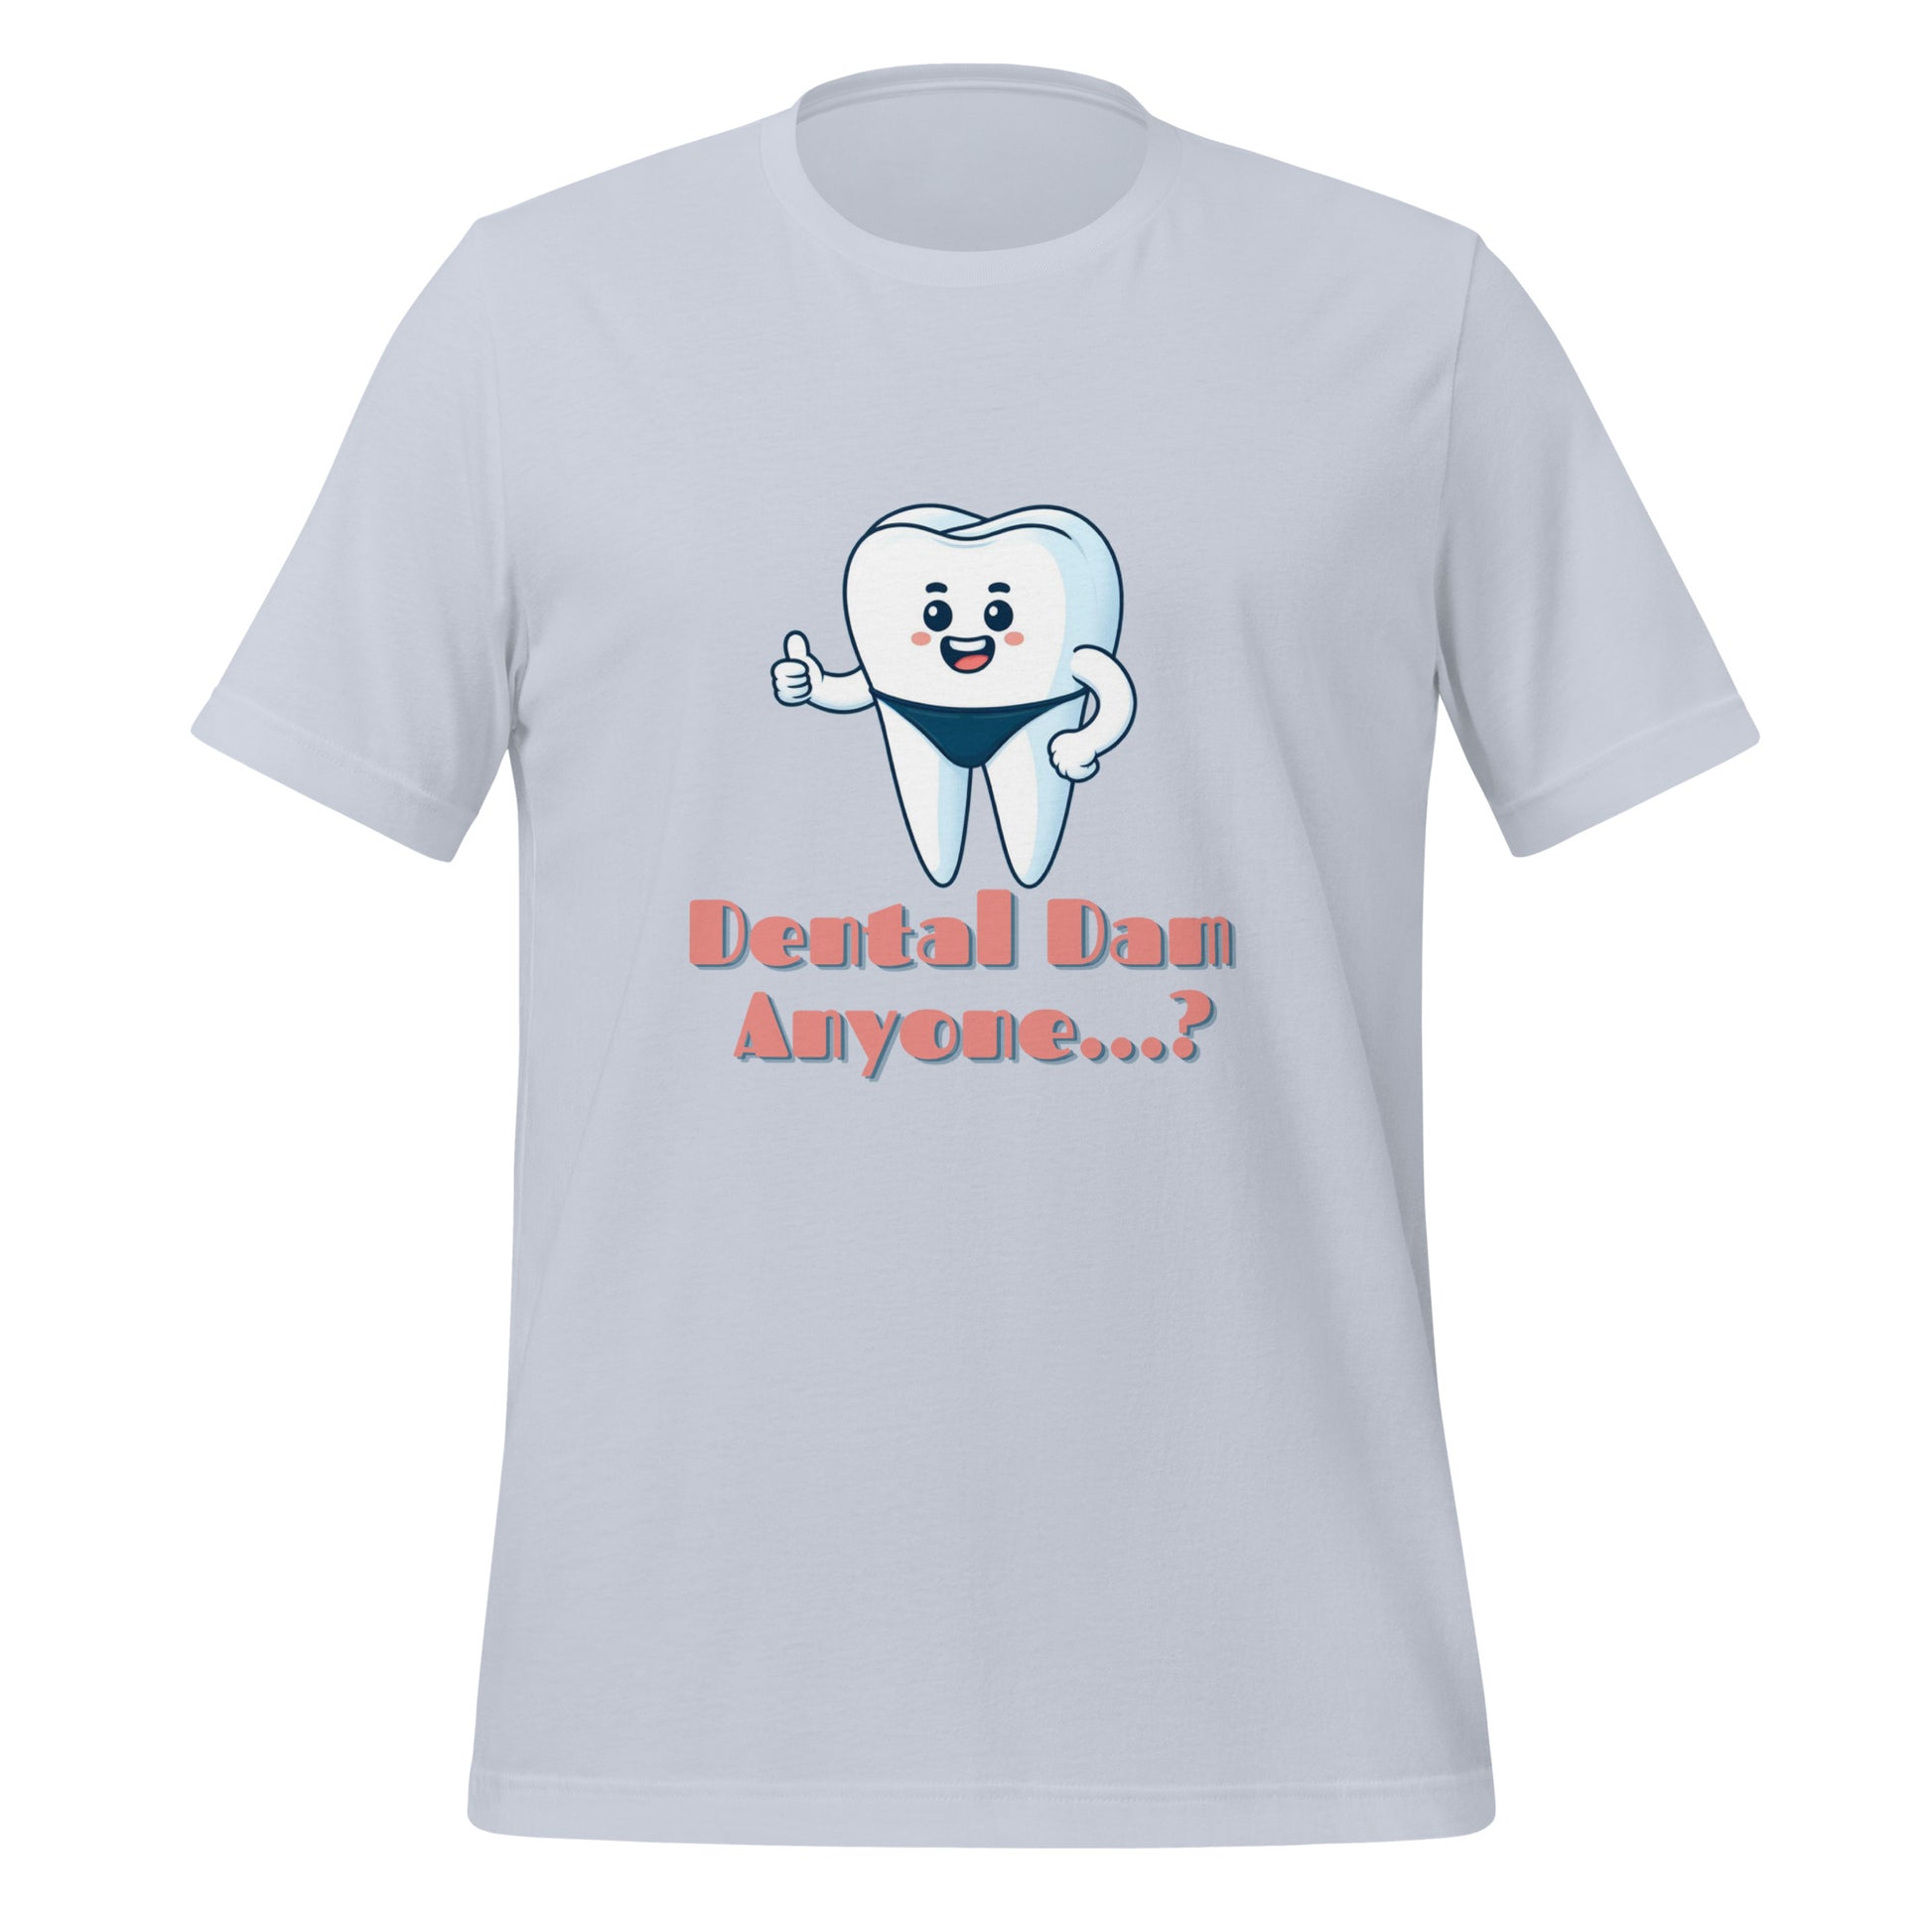 Funny dental shirt featuring a playful tooth character in a speedo with the text ‘Dental Dam Anyone?’, perfect for dentists, dental hygienists, and dental students who enjoy dental humor. This dental shirt is a unique addition to any dental professional’s wardrobe, making it an ideal dental office shirt. Don’t miss out on our dental assistant shirts and dental hygiene shirts. Light blue color.